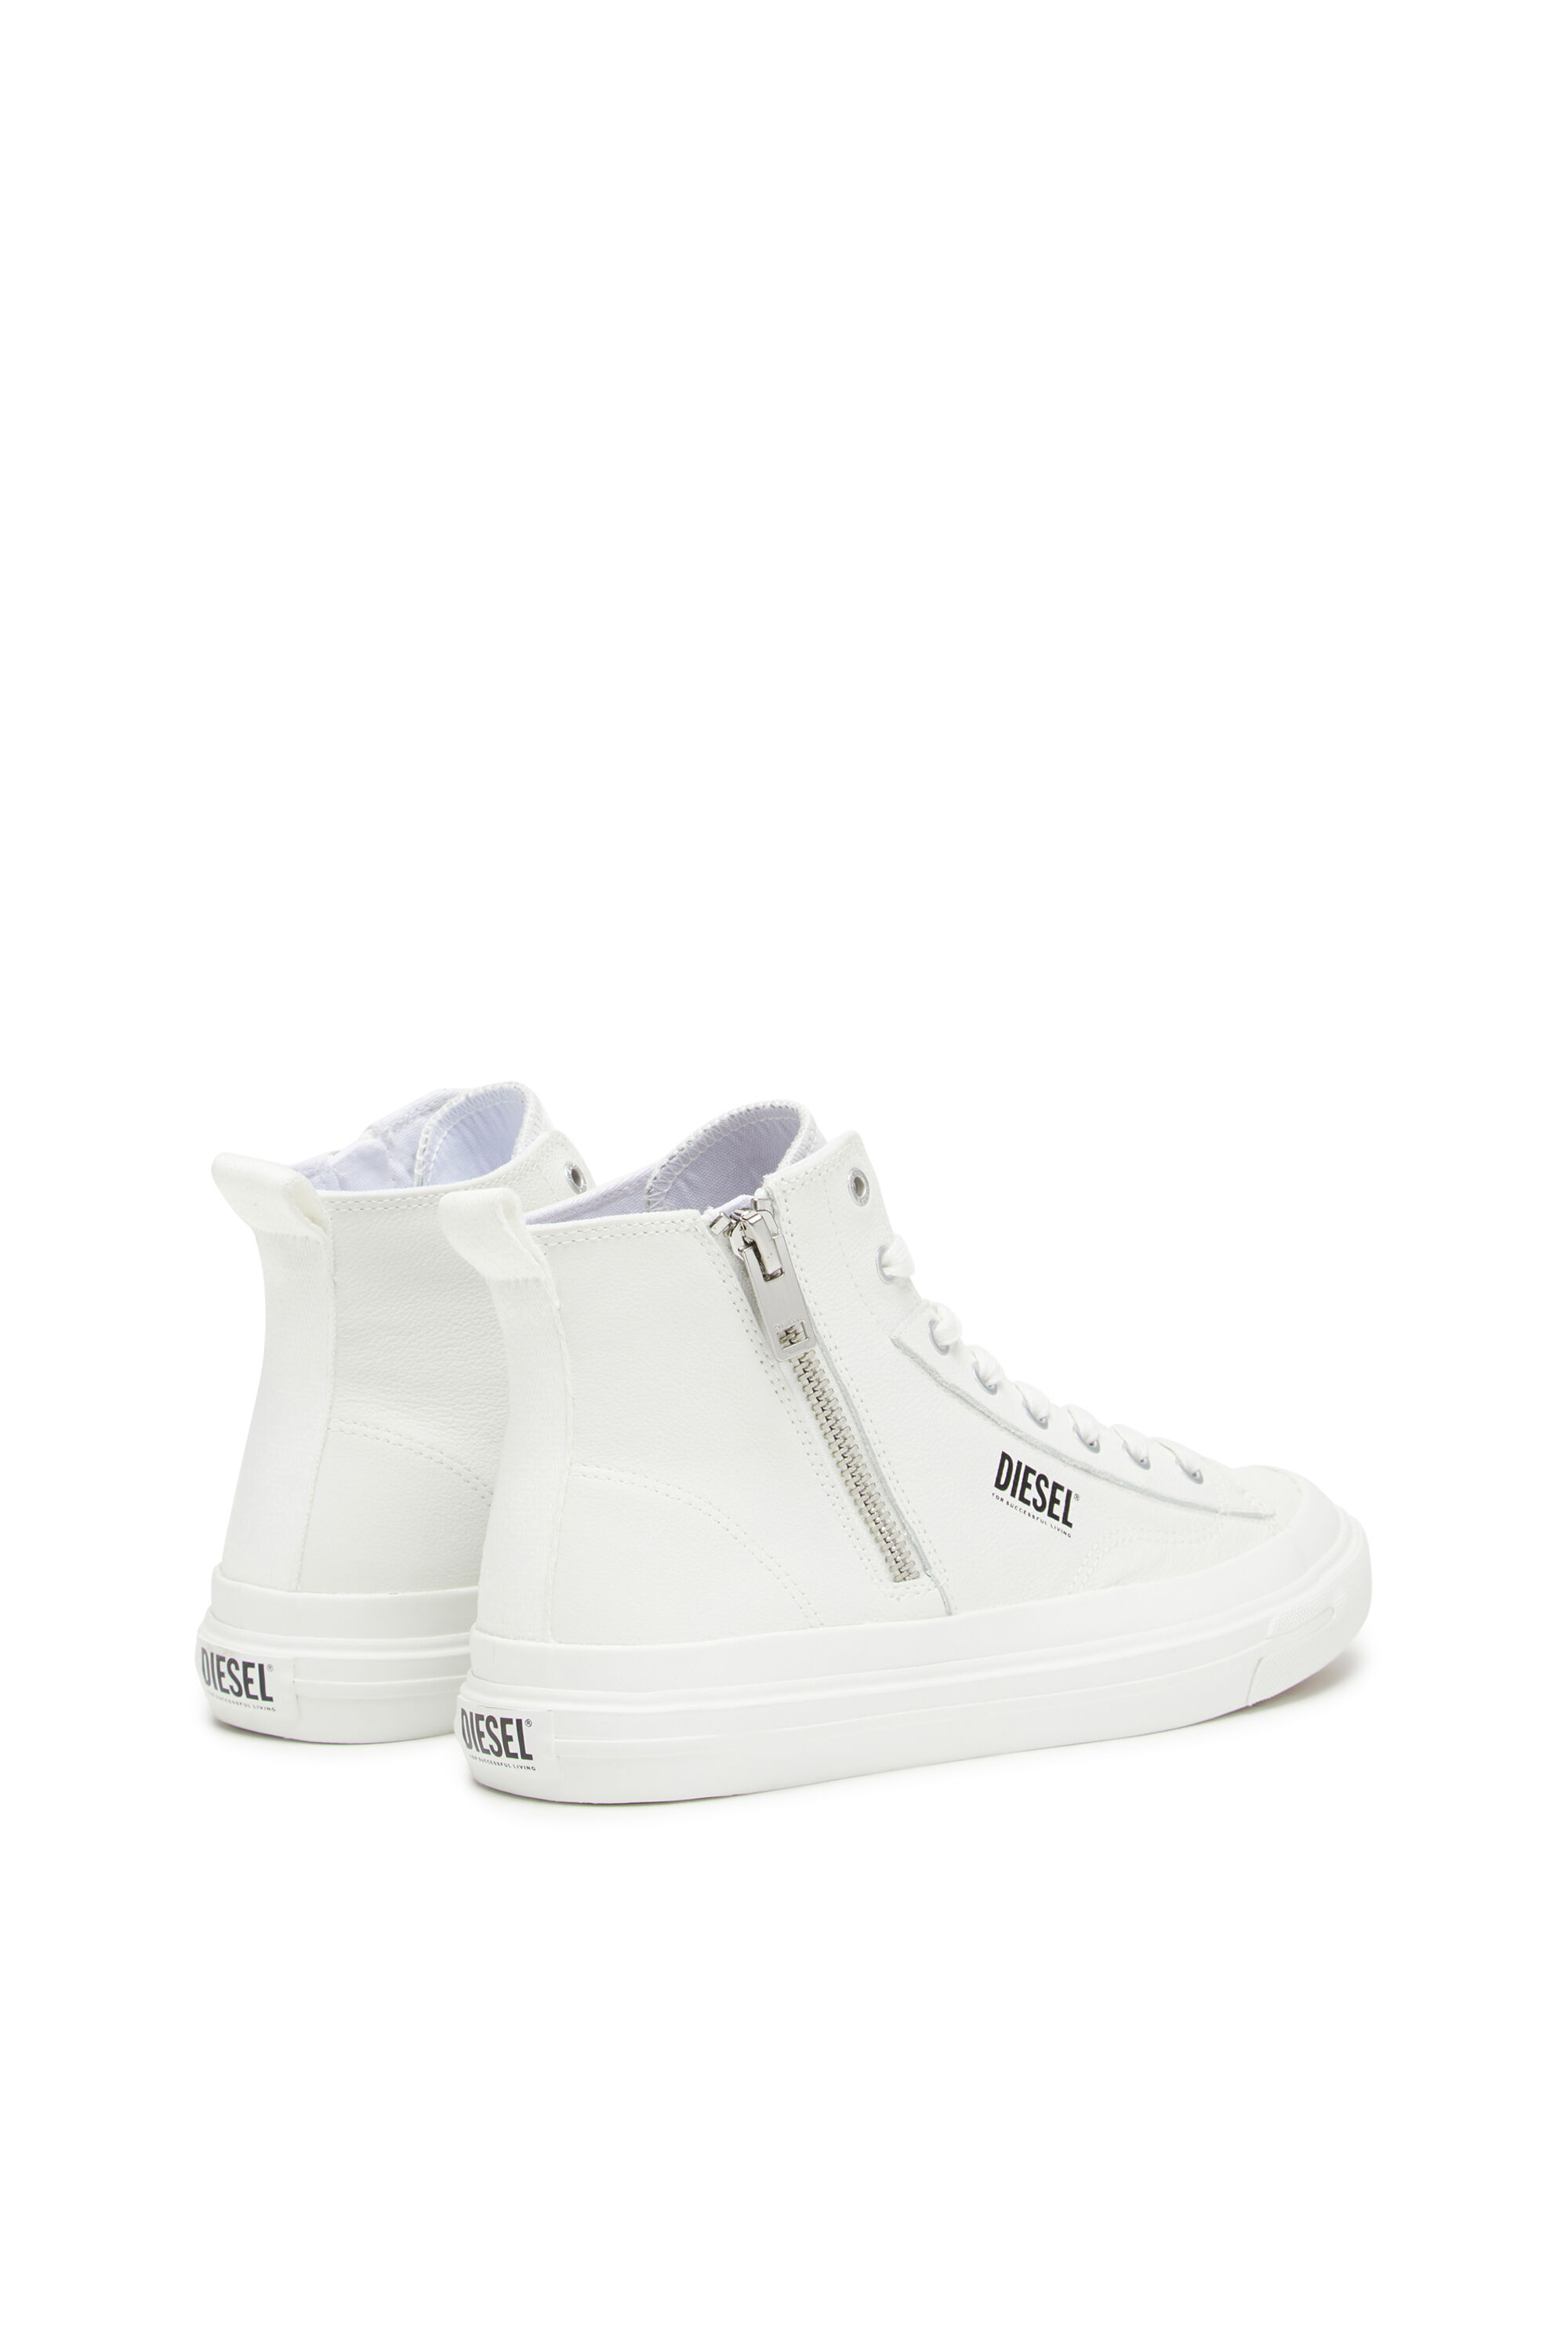 Men's S-Athos Dv Mid - High-top sneakers with side zip | White 